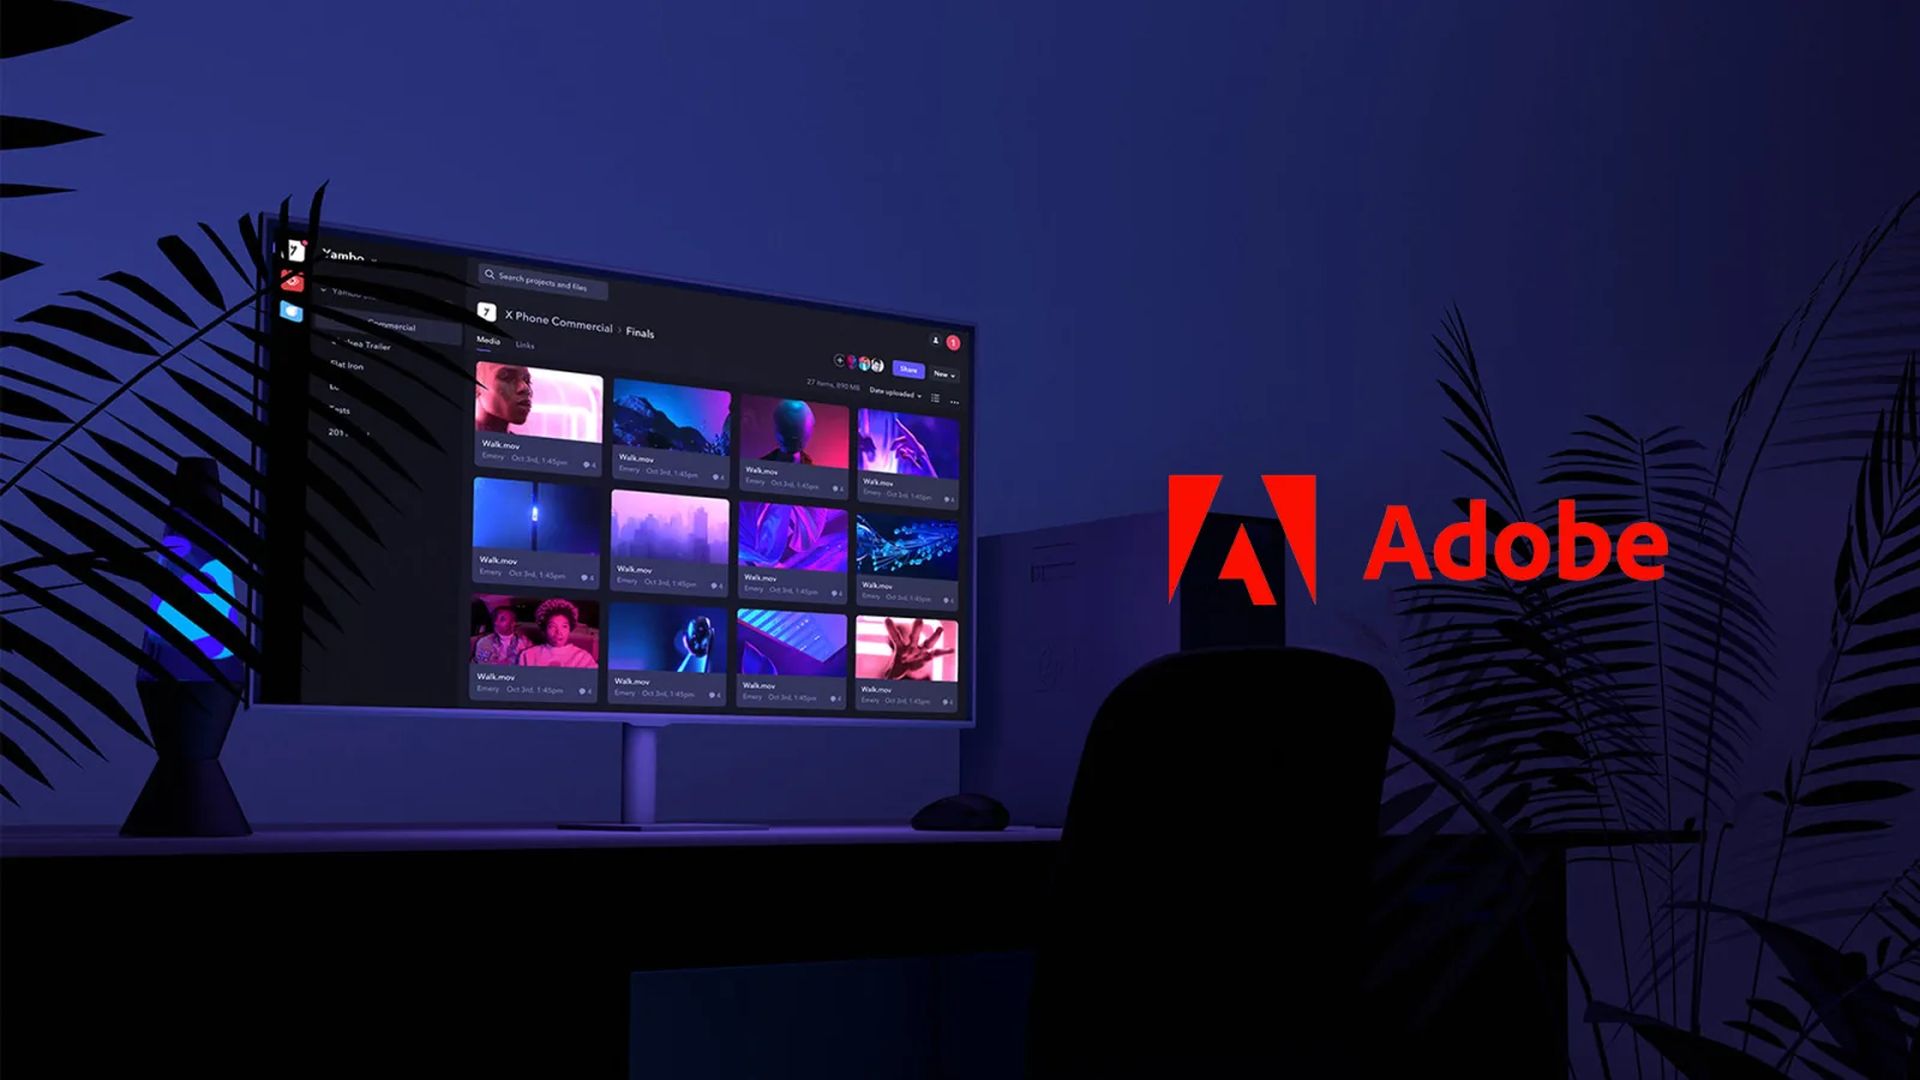 In this article, we are going to be covering shares of Adobe dropping by 17% after Adobe buys Figma, a design software firm that is a competitor.